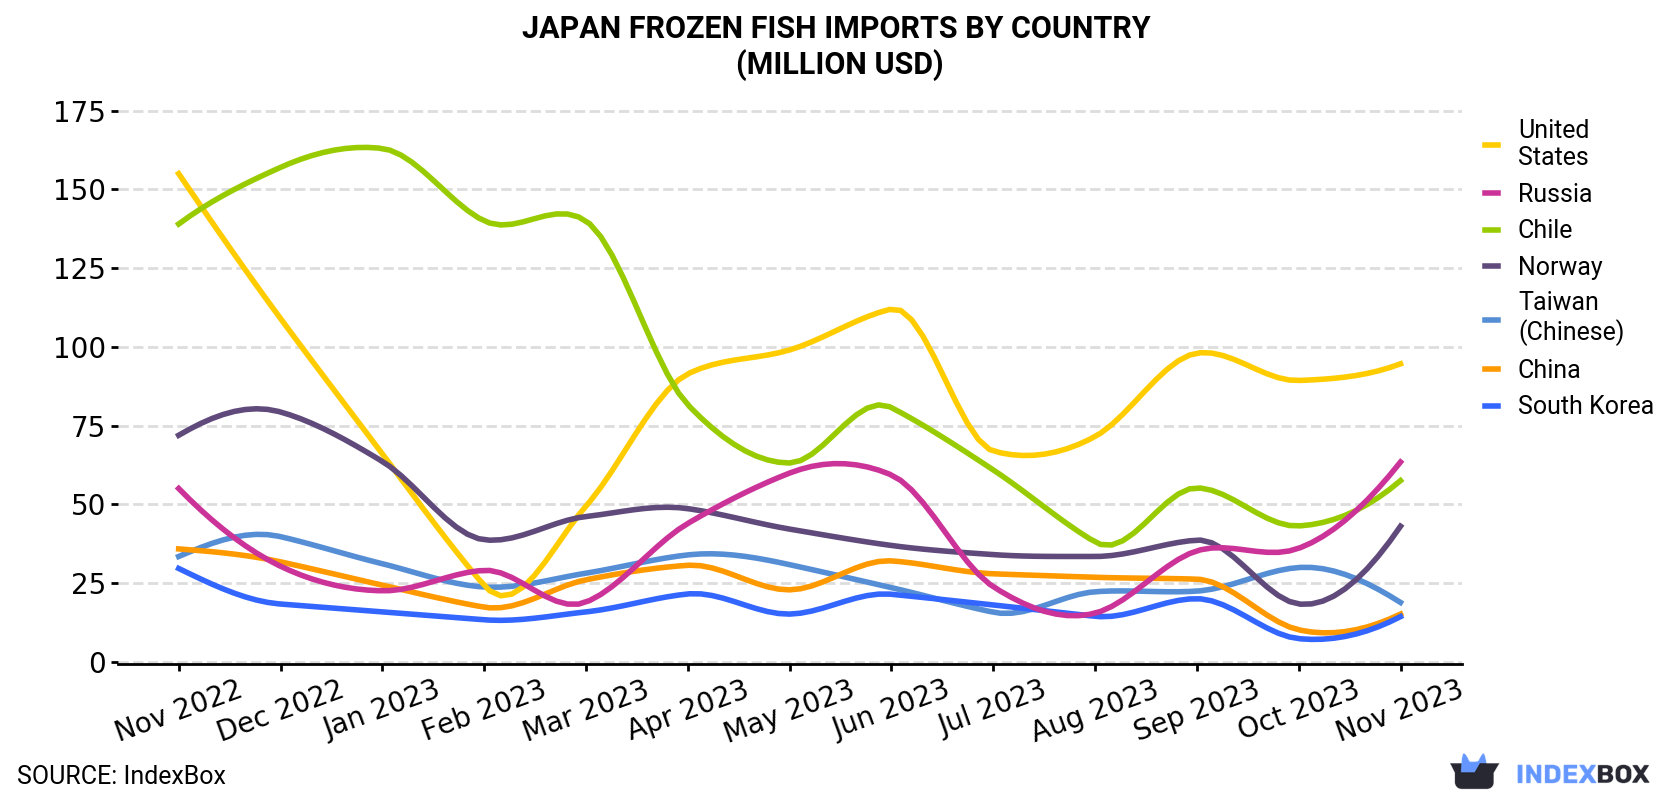 Japan Frozen Fish Imports By Country (Million USD)